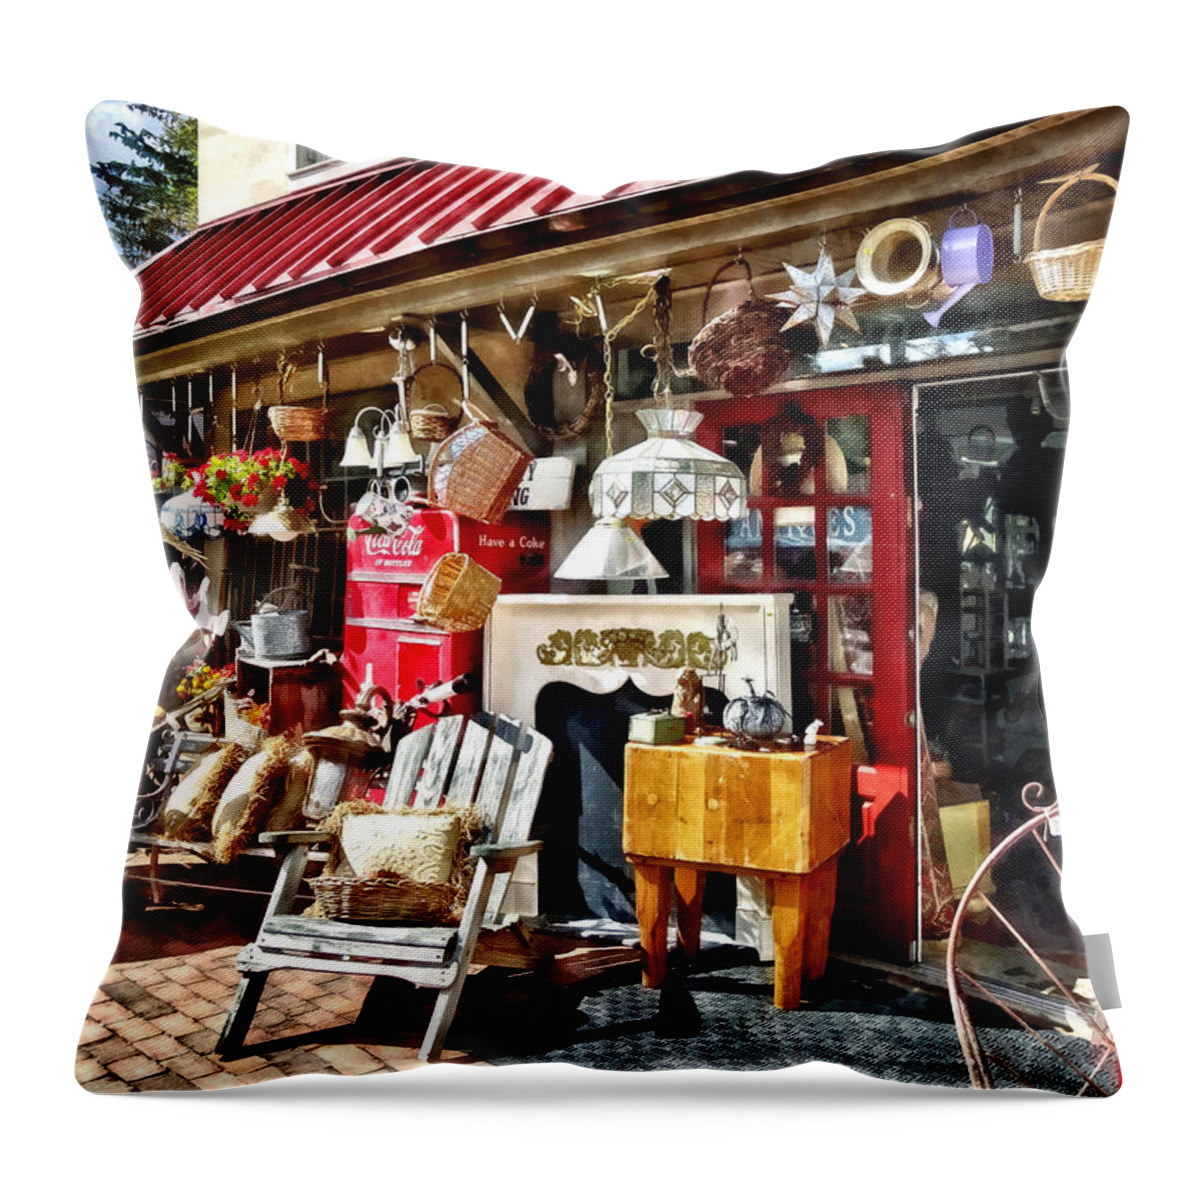 New Hope Throw Pillow featuring the photograph New Hope PA Antique Shop by Susan Savad